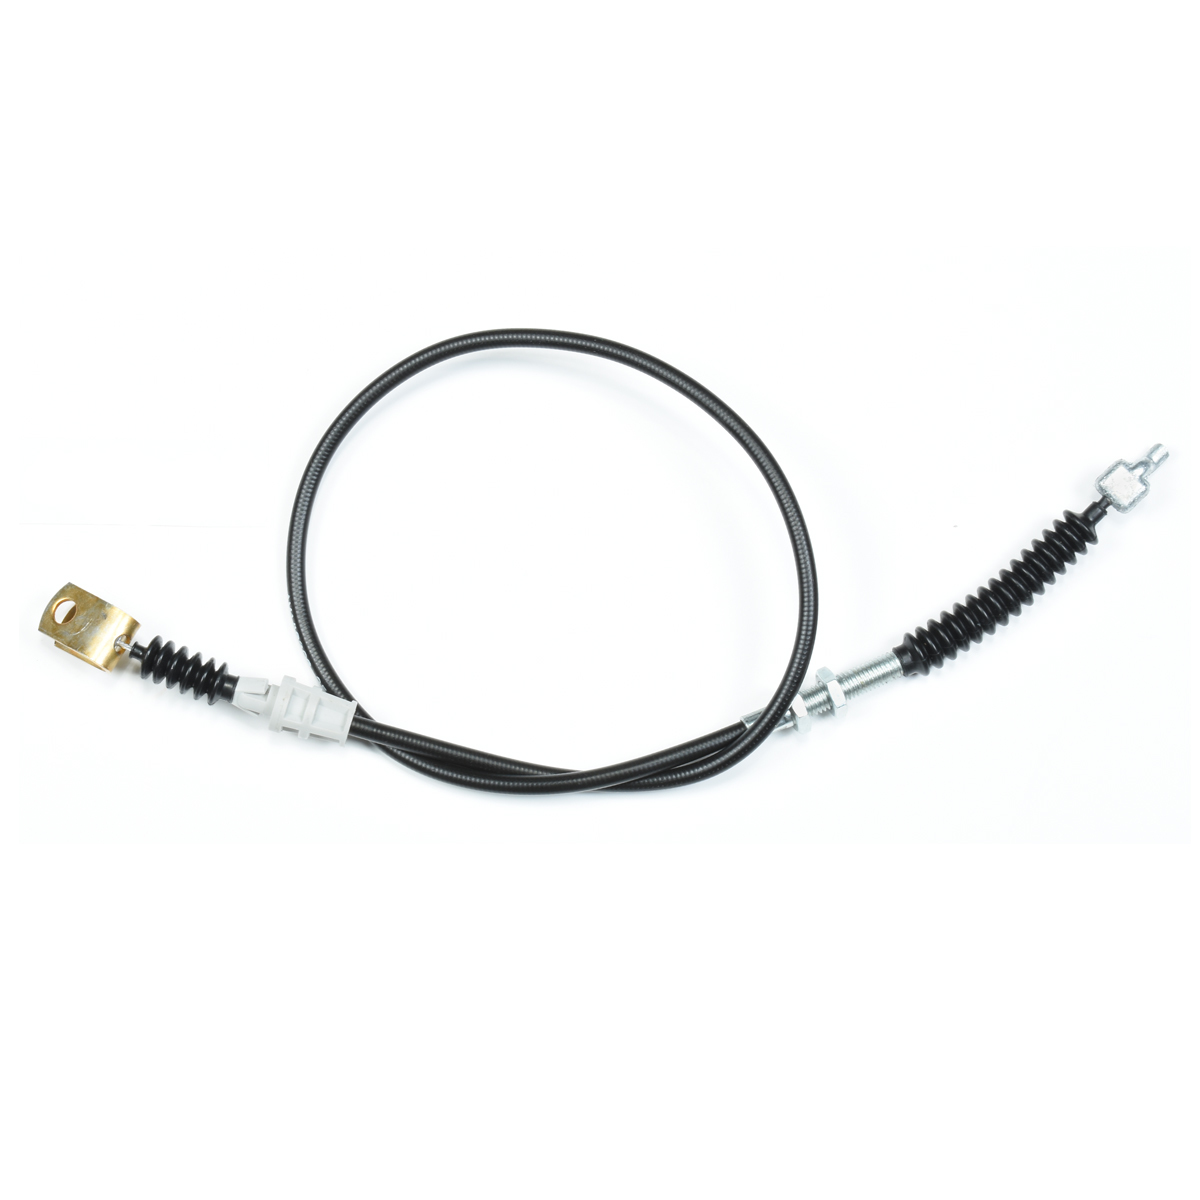 Differential Cable for XUV Gators